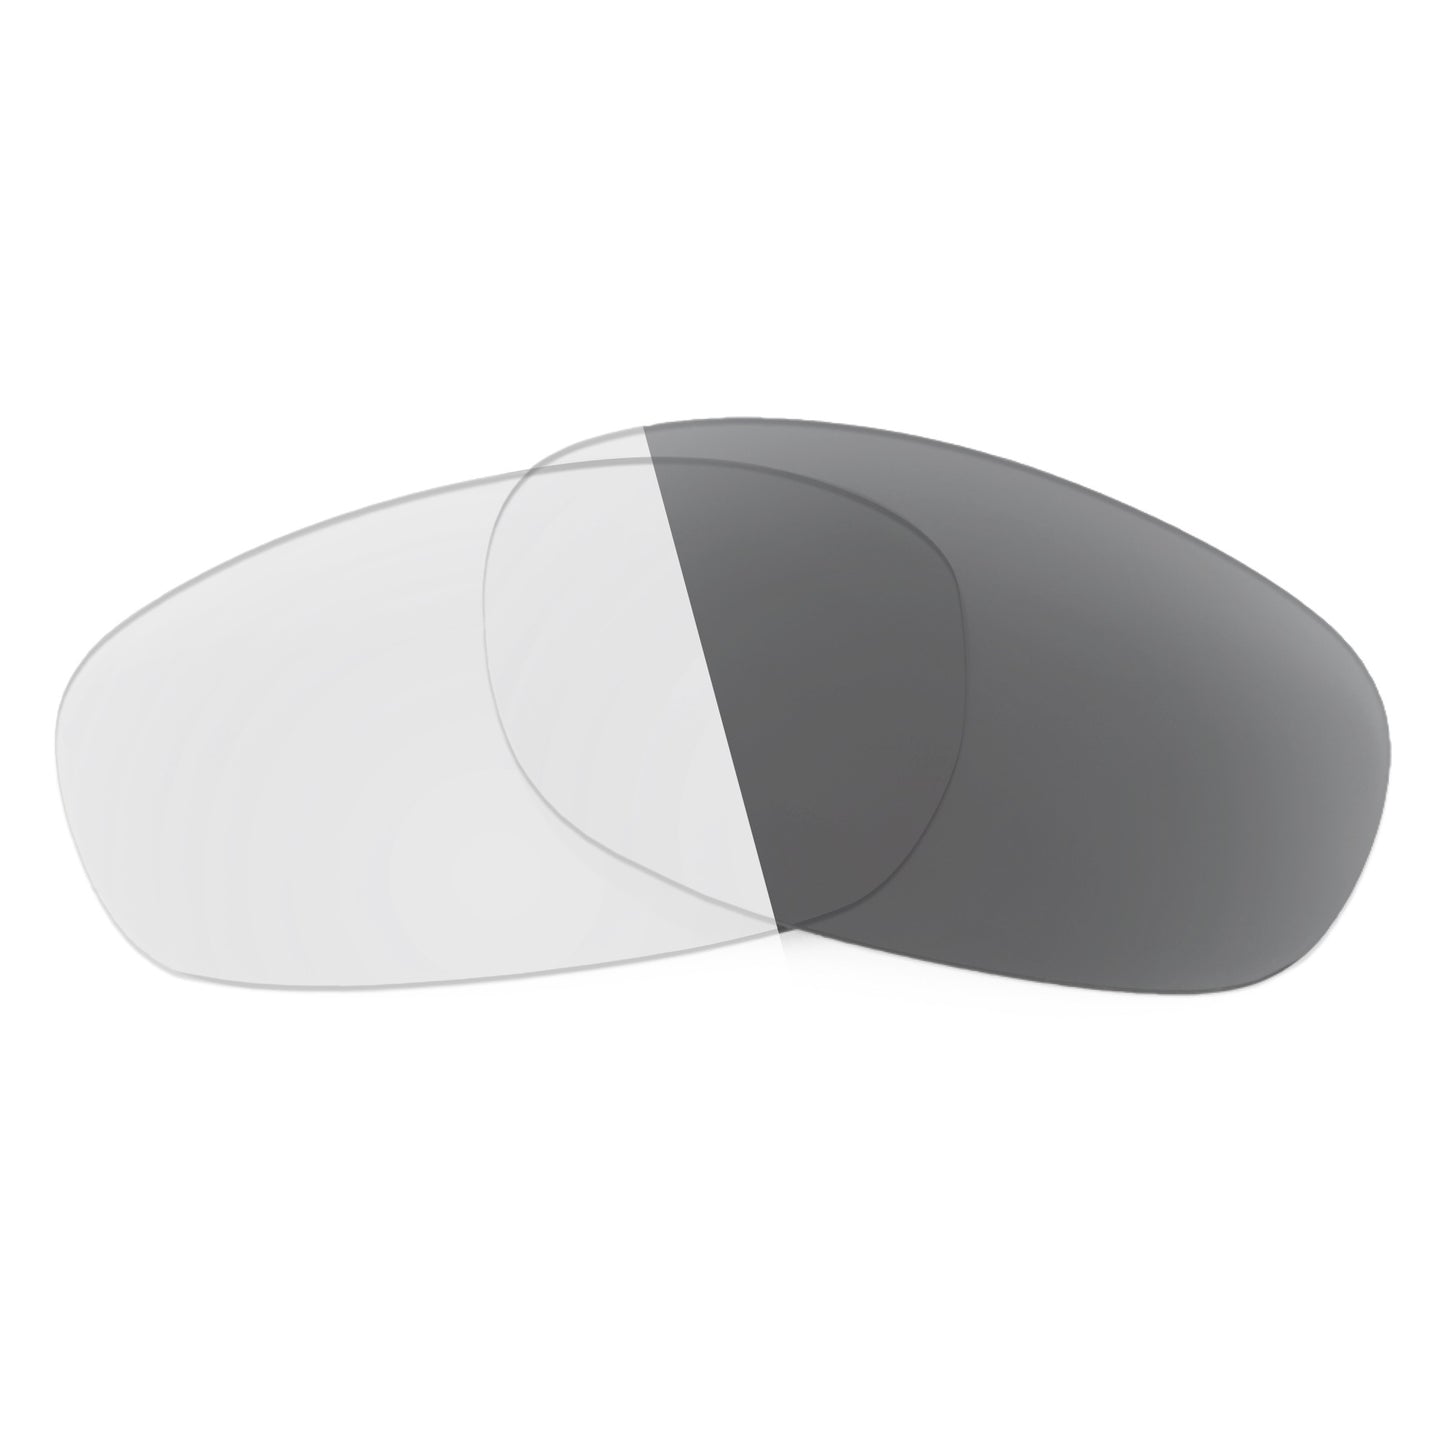 Revant replacement lenses for Ray-Ban Predator 2 RB4114 62mm Non-Polarized Adapt Gray Photochromic